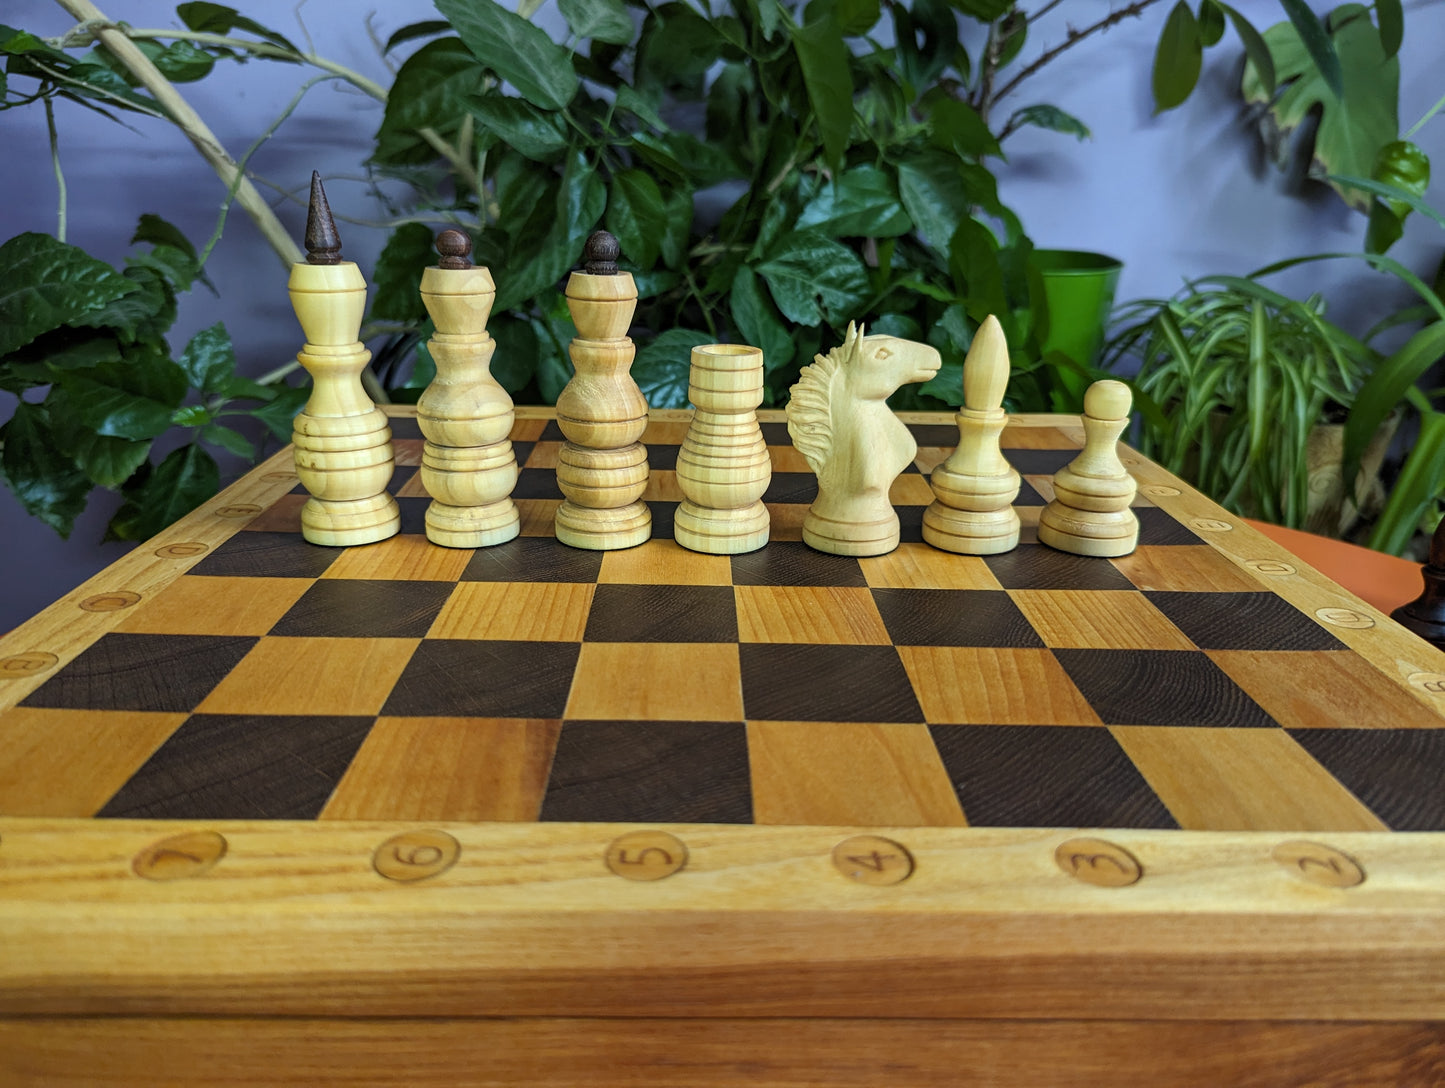 Handcrafted Chess Chest with wooden carved chess pieces inside and with chessboard on top.